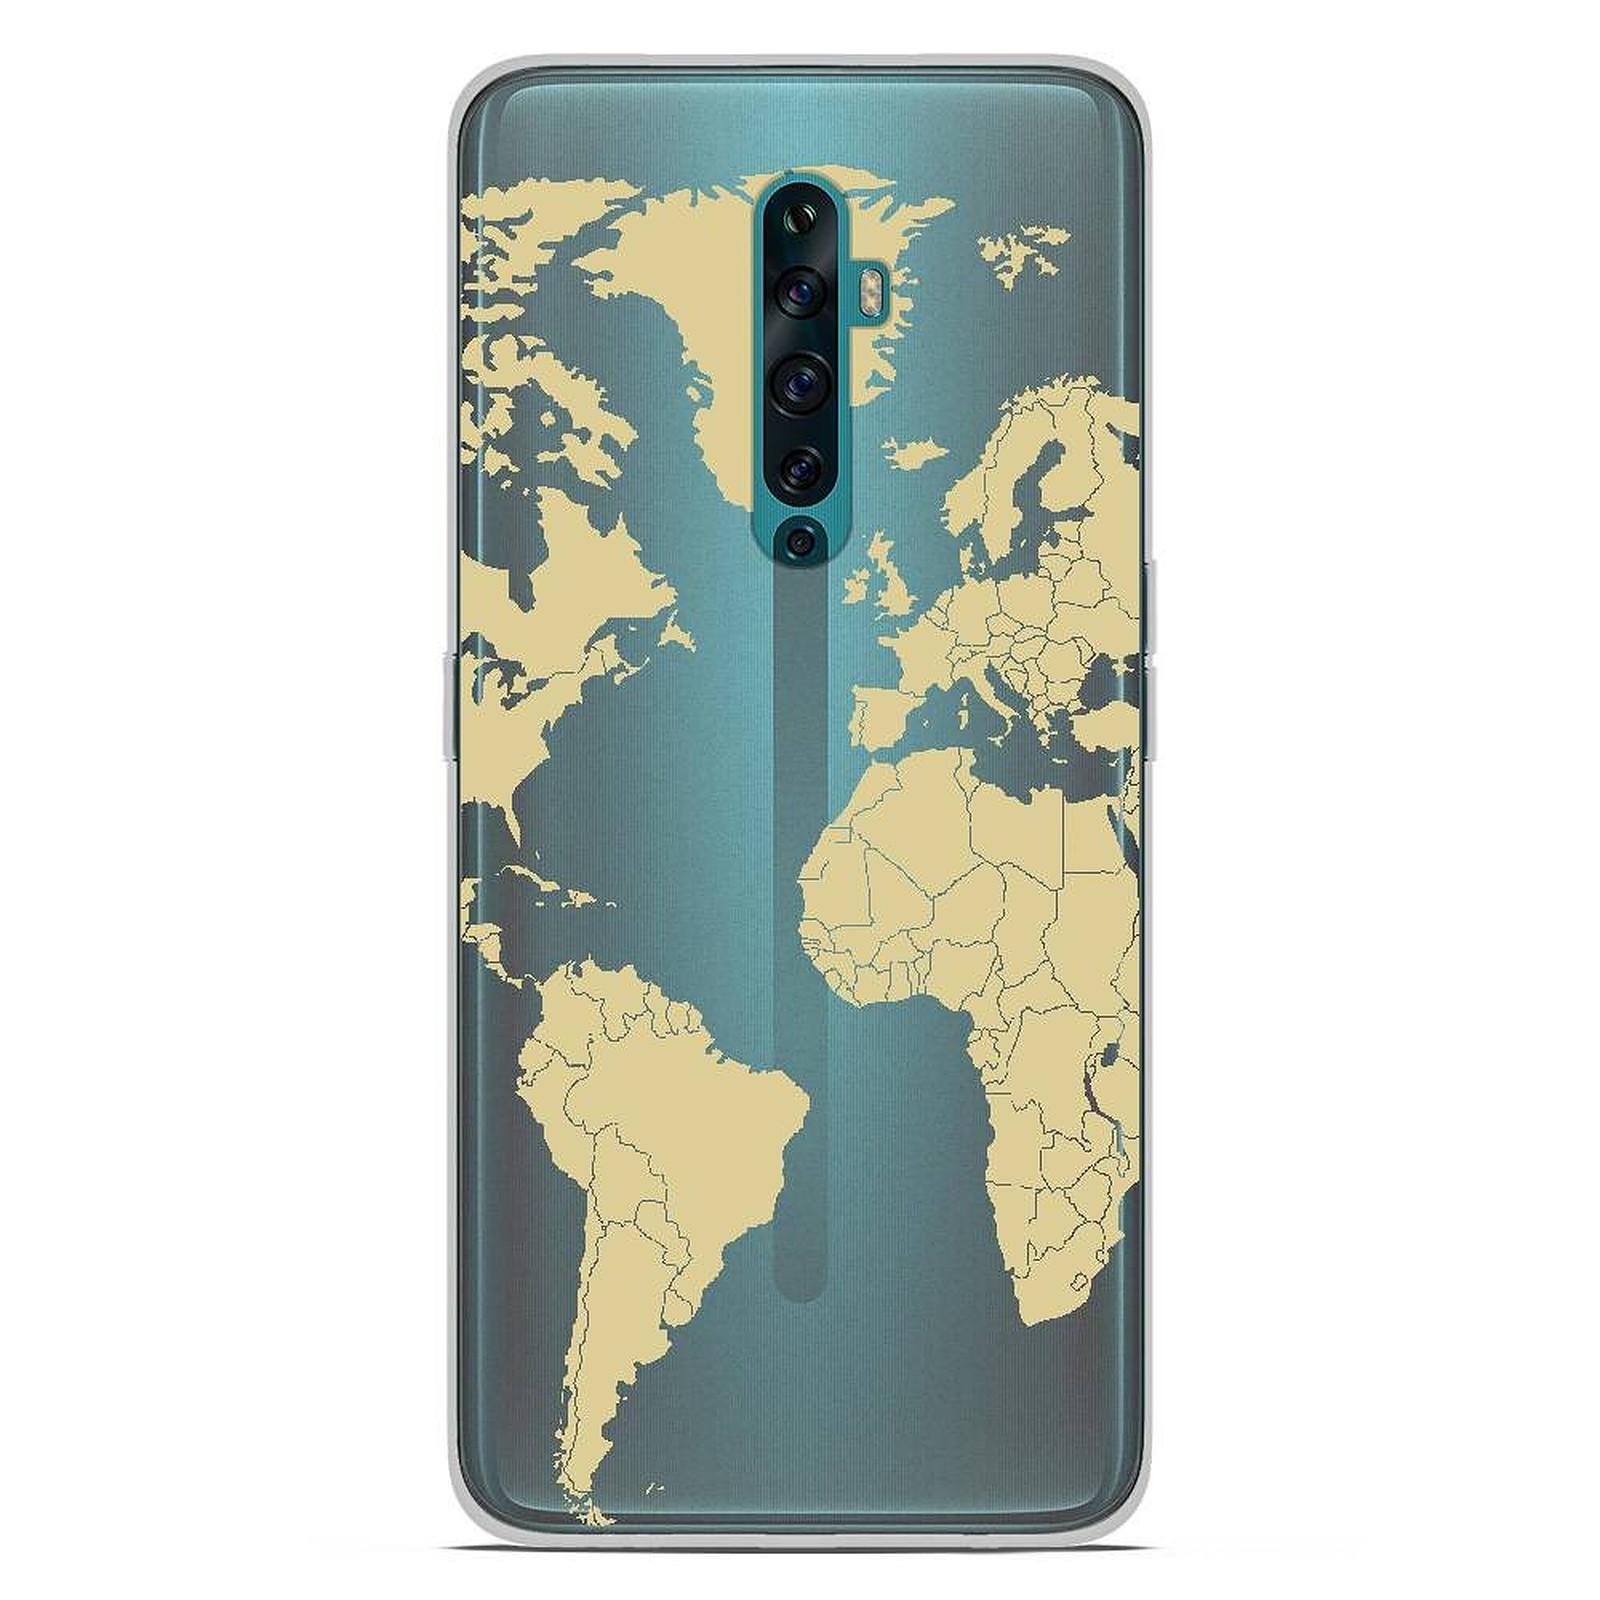 1001 Coques Coque silicone gel Oppo Reno 2Z motif Map beige - Coque telephone 1001Coques